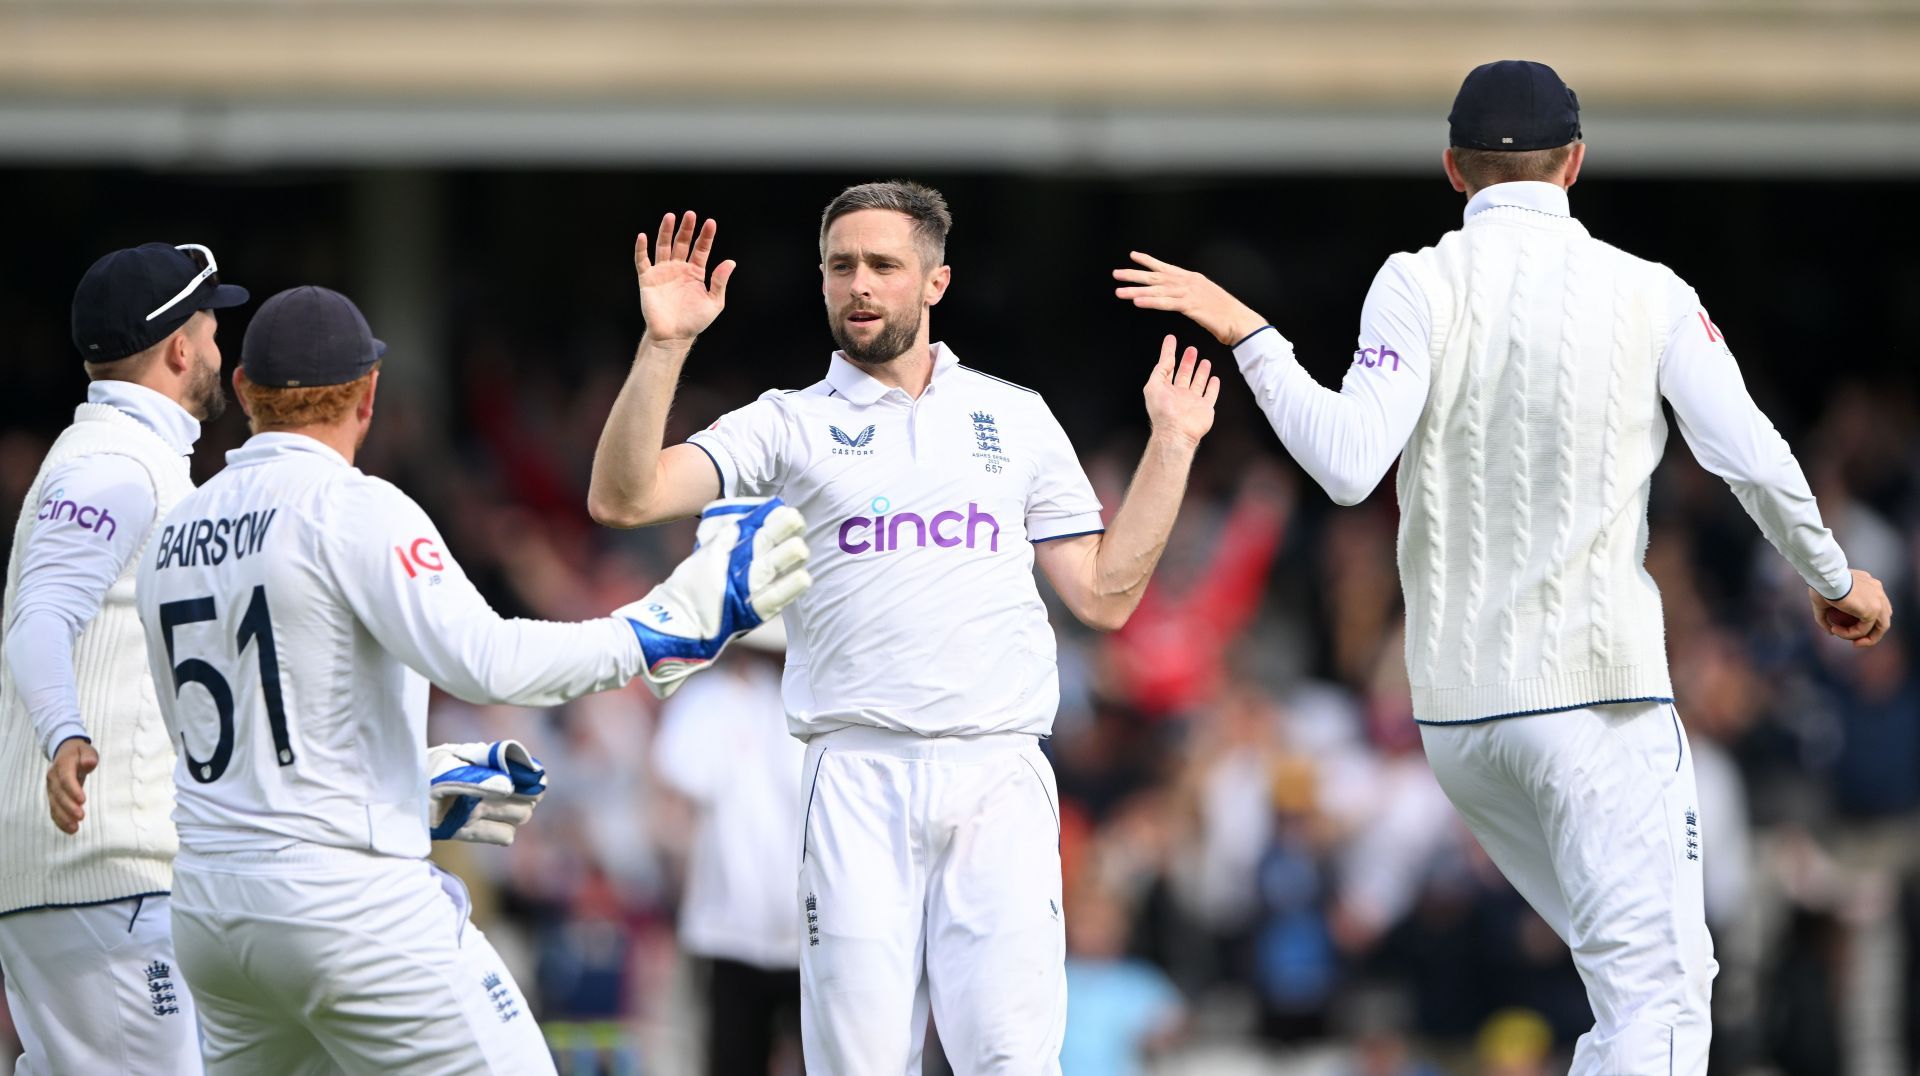 Chris Woakes played just 3 Tests in the series but had a massive impact